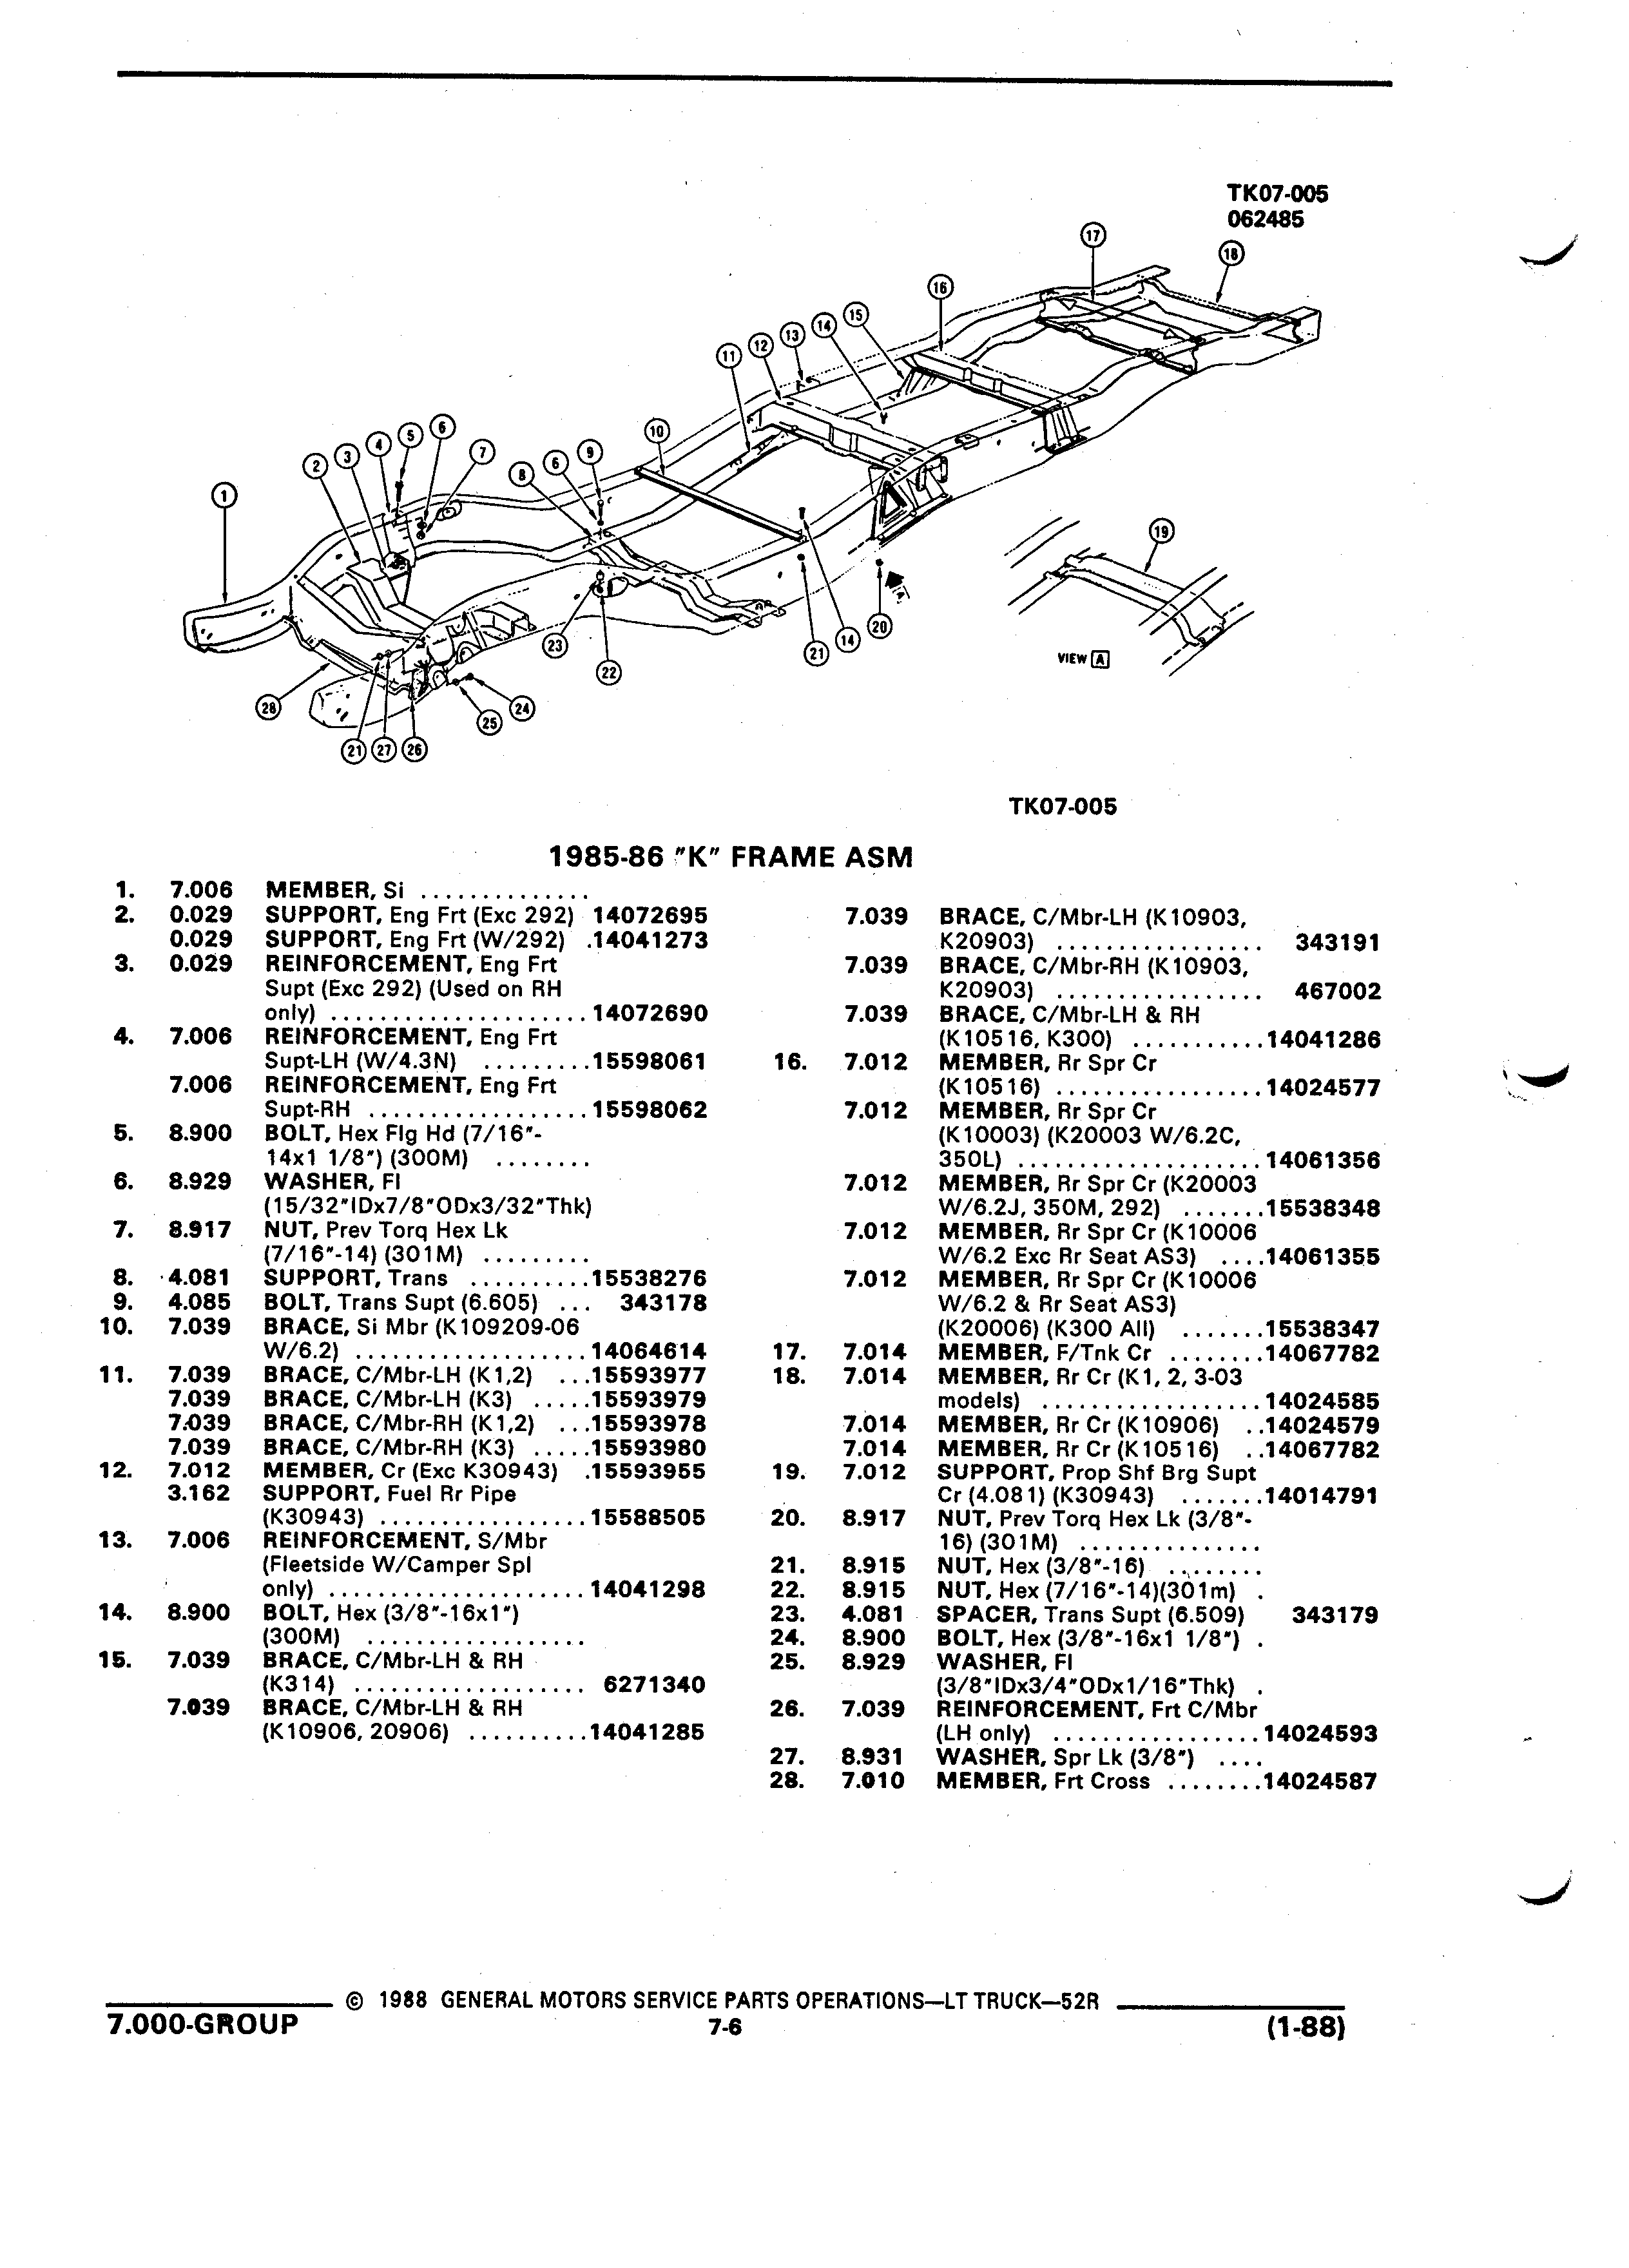 Parts and Illustration Catalog P&A 52R January 1988